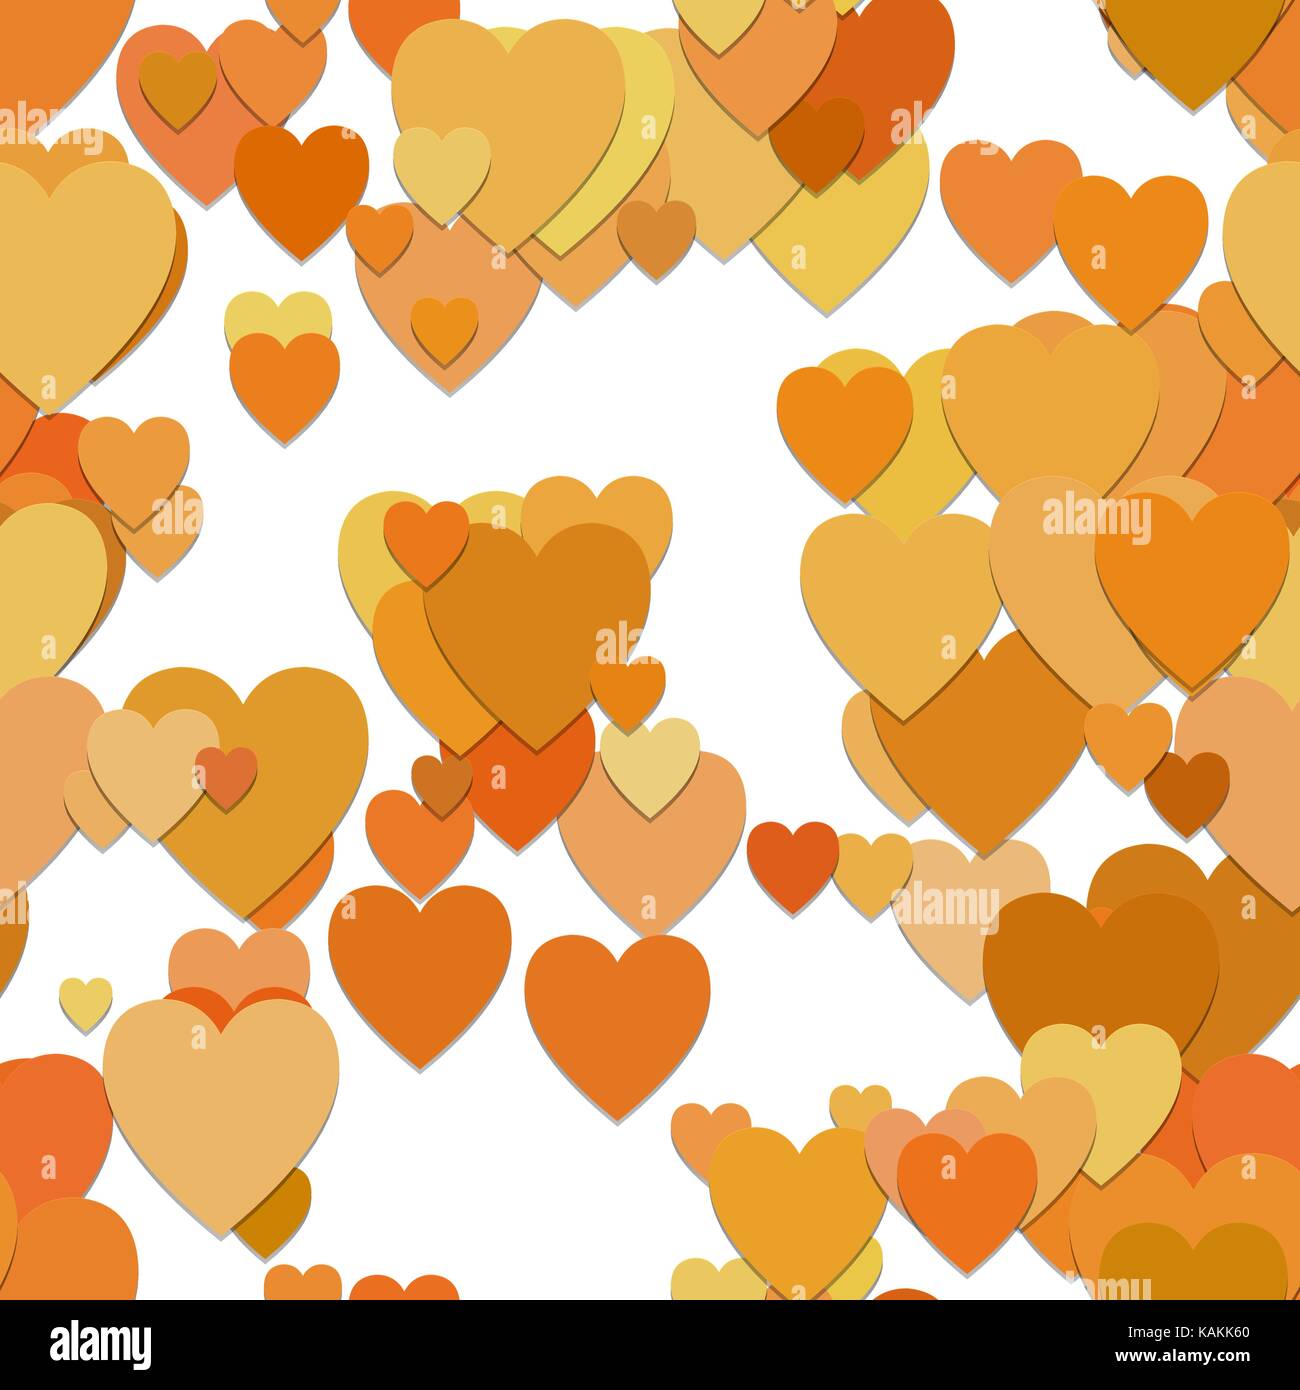 Seamless heart background pattern - vector graphic from hearts in orange tones Stock Vector